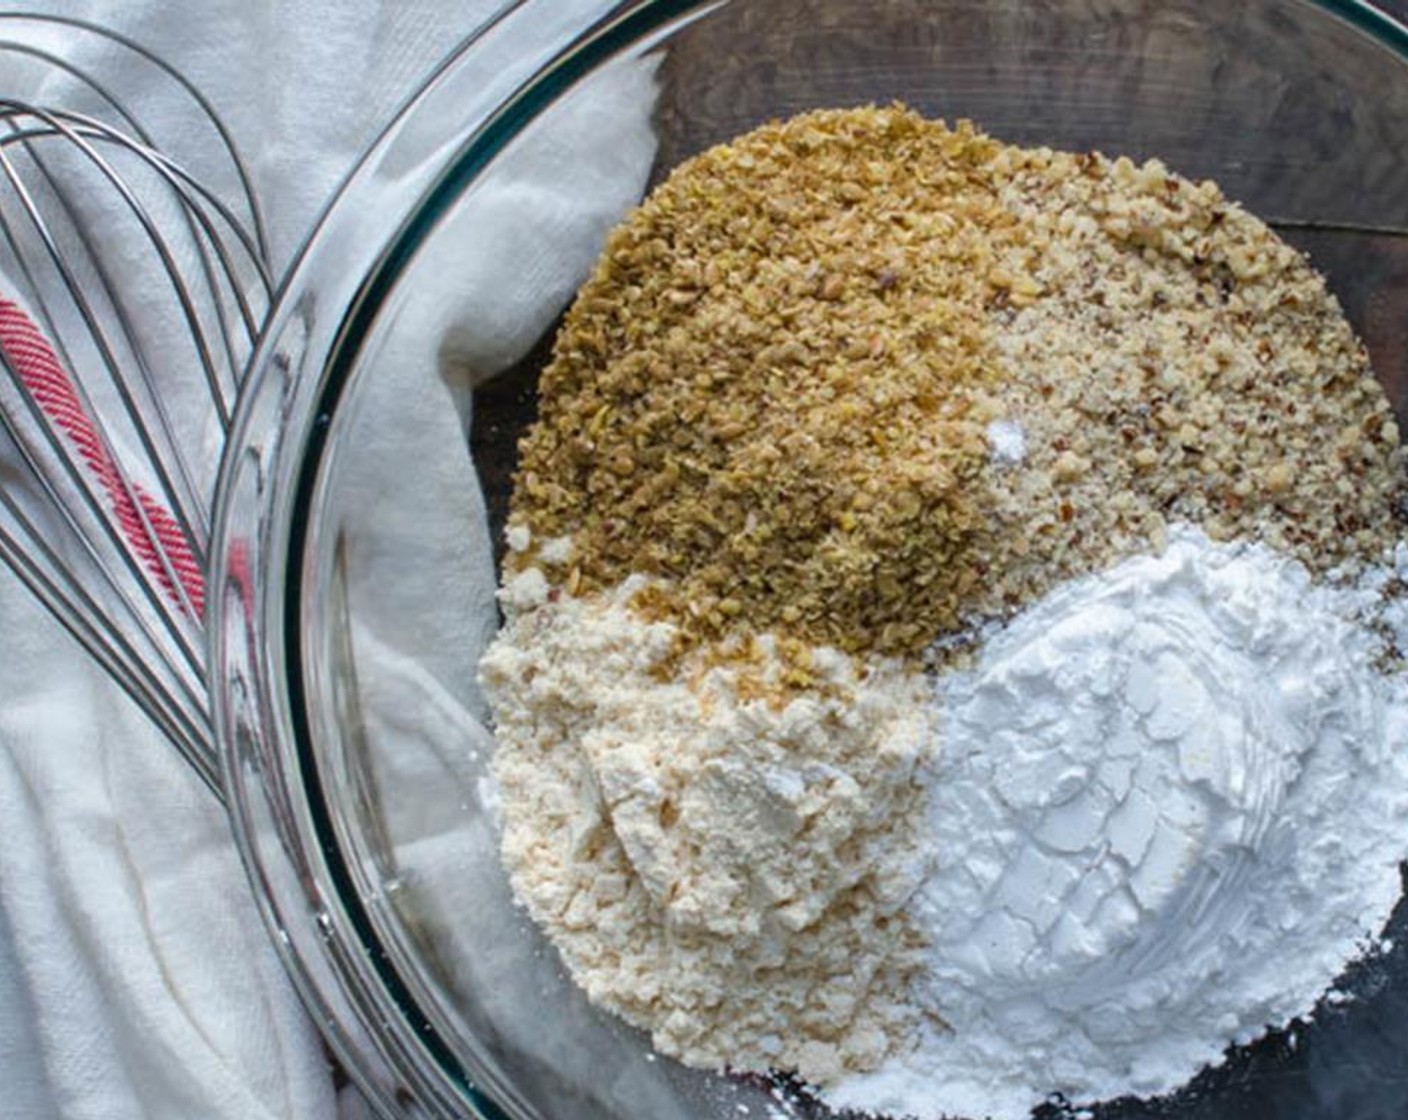 step 3 In a medium bowl combine the Coconut Flour (1/4 cup), Arrowroot Starch (1/4 cup), Hazelnut Flour (1 1/4 cups), Flaxseed Meal (2 Tbsp), Baking Powder (1 tsp), Baking Soda (1 tsp), Salt (1/2 tsp) and Ground Cinnamon (1 tsp).